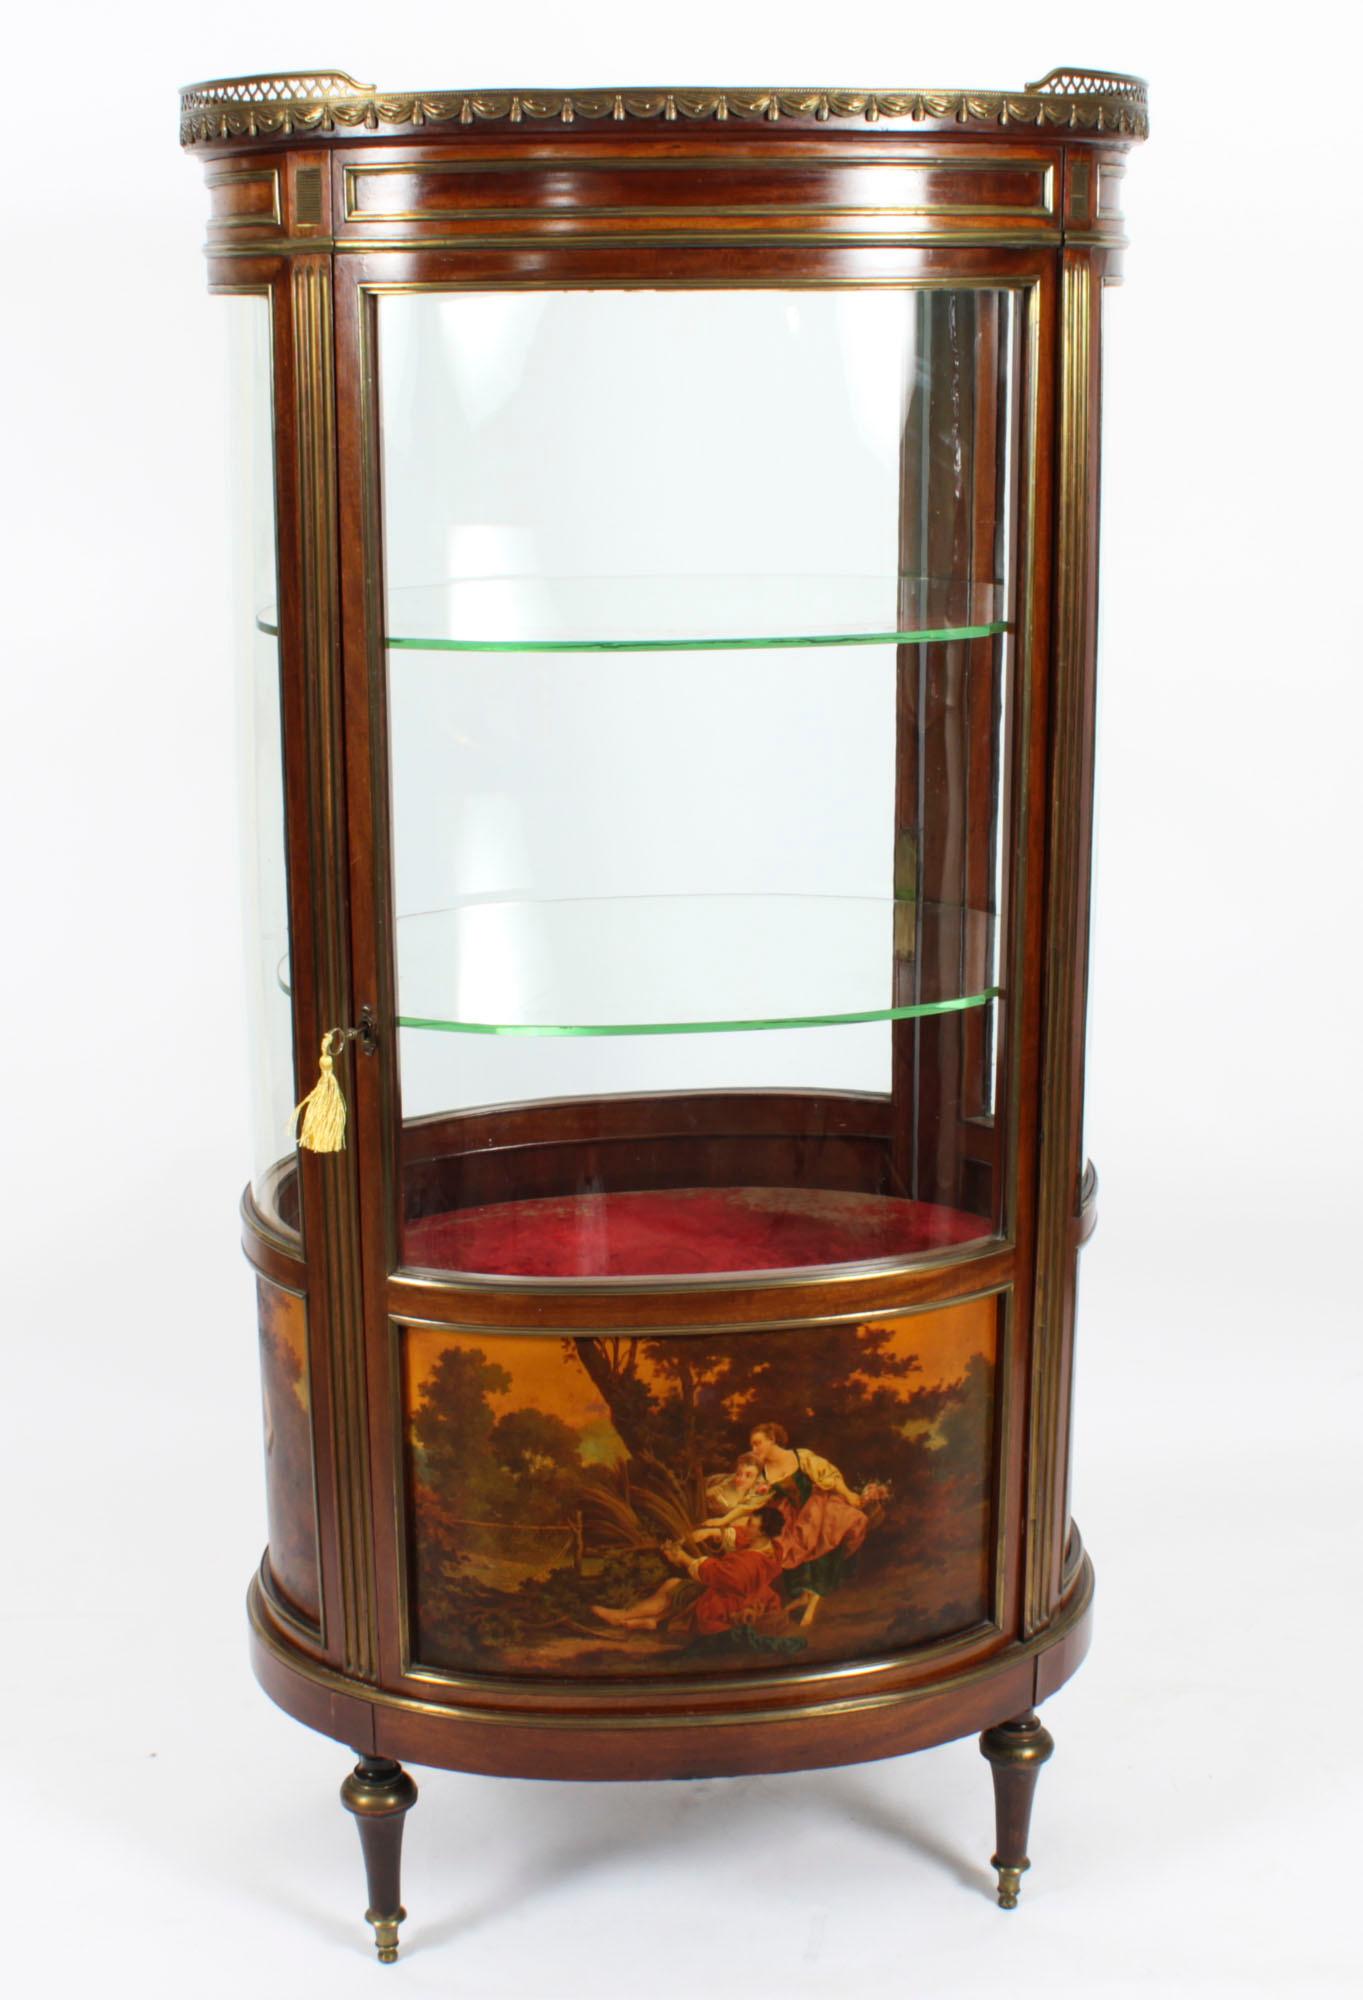 Antique French Oval Free Standing Vernis Martin Cabinet Vitrine, 19th Century For Sale 13